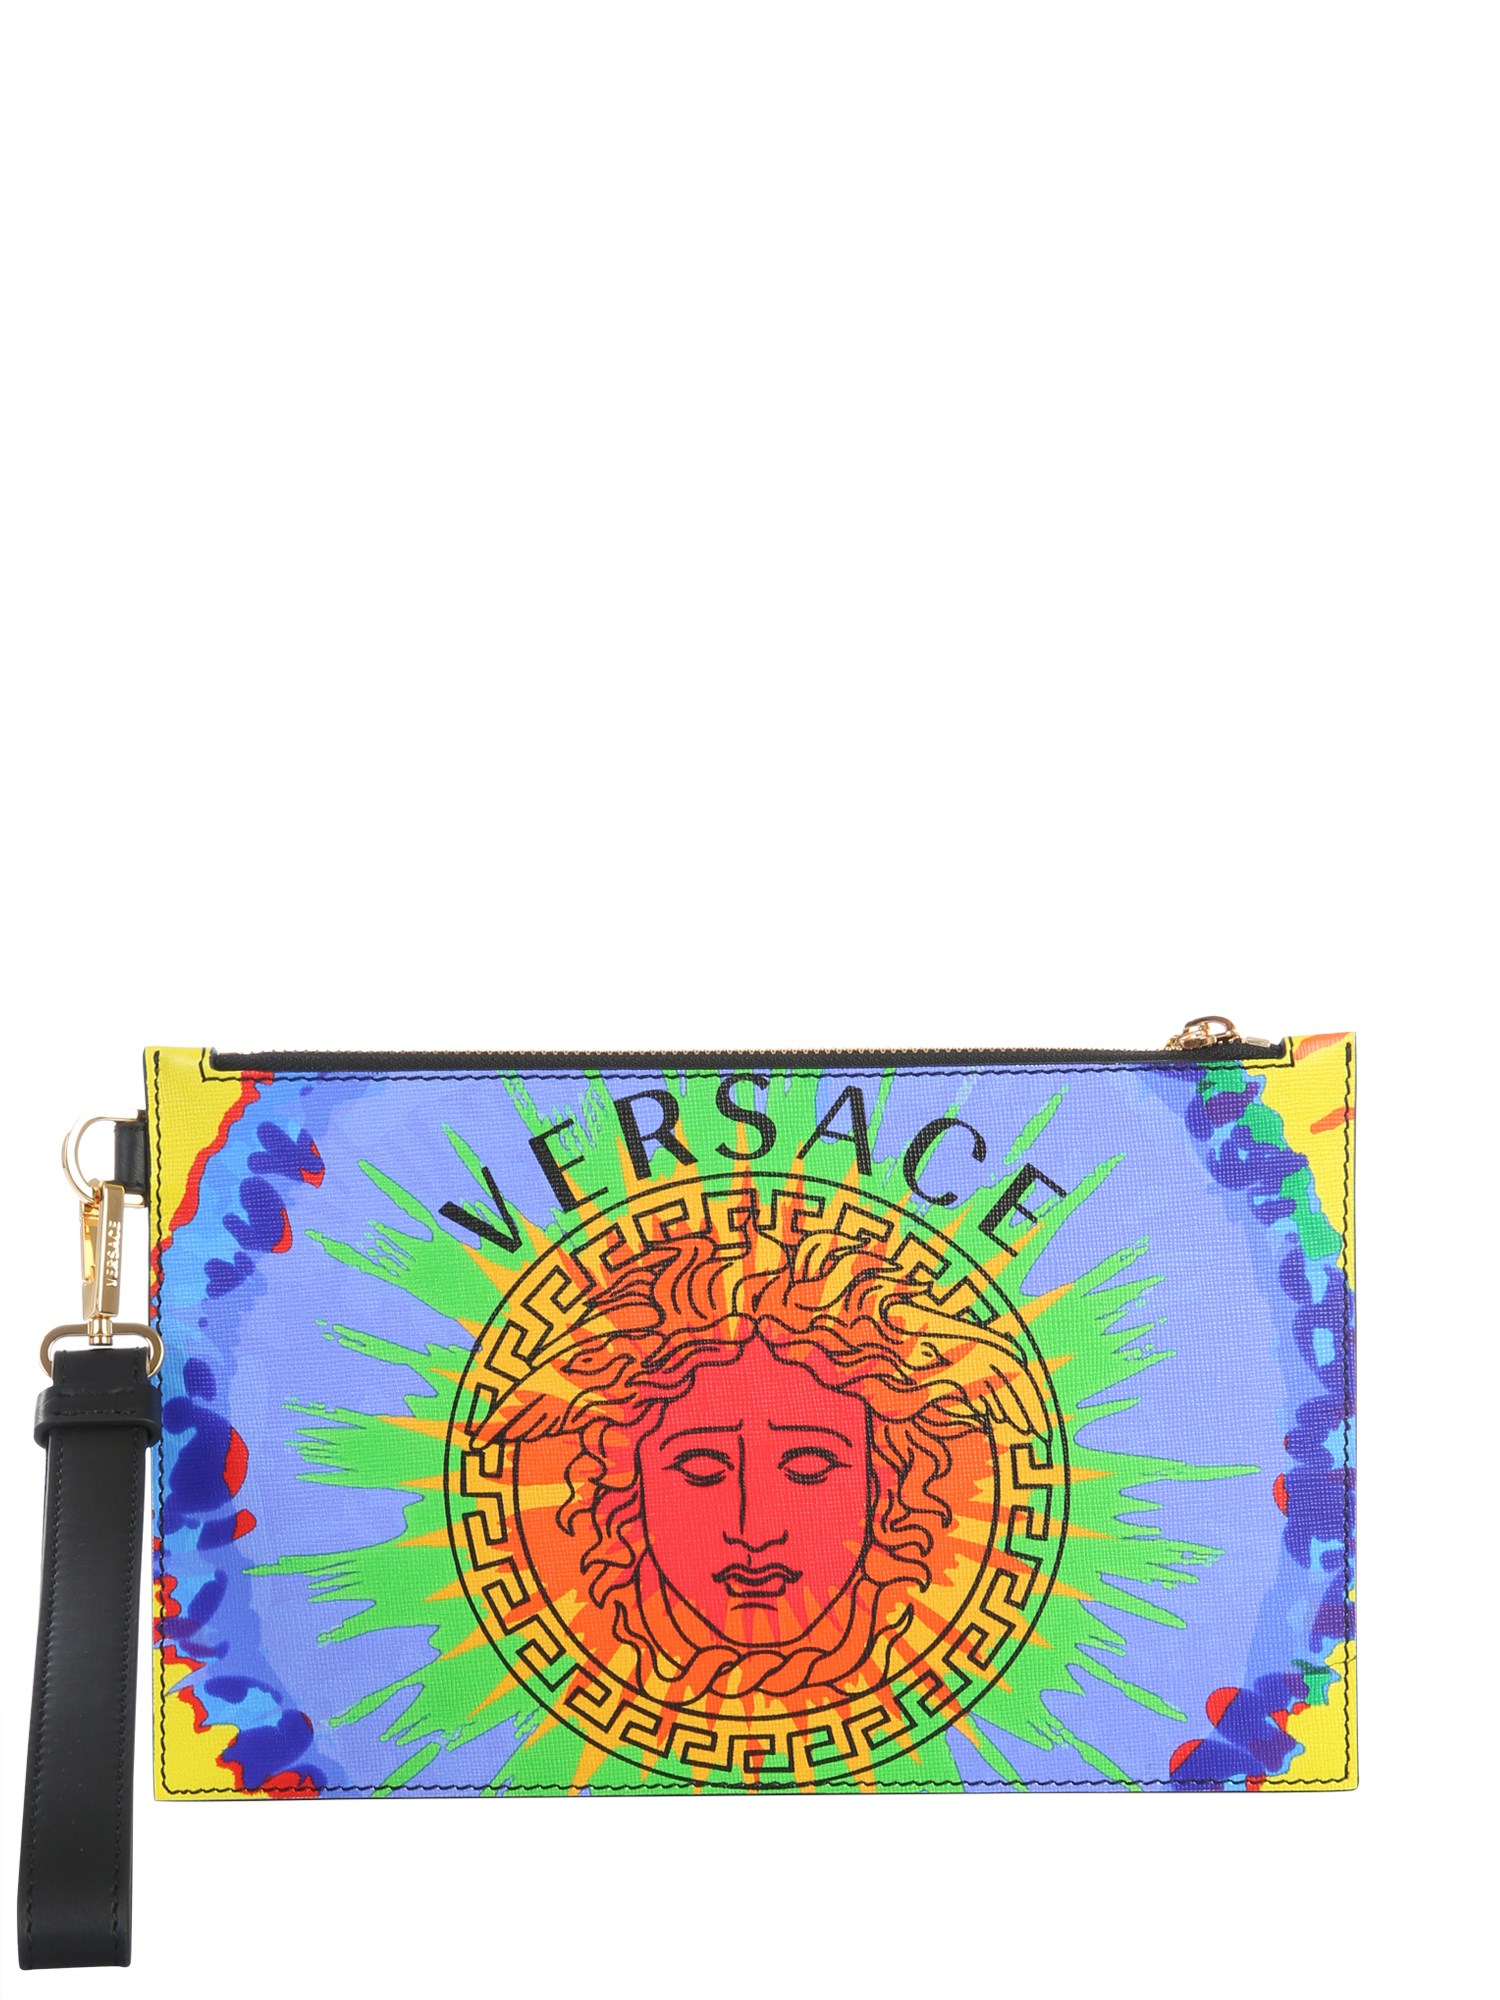 VERSACE POUCH WITH LOGO,177305